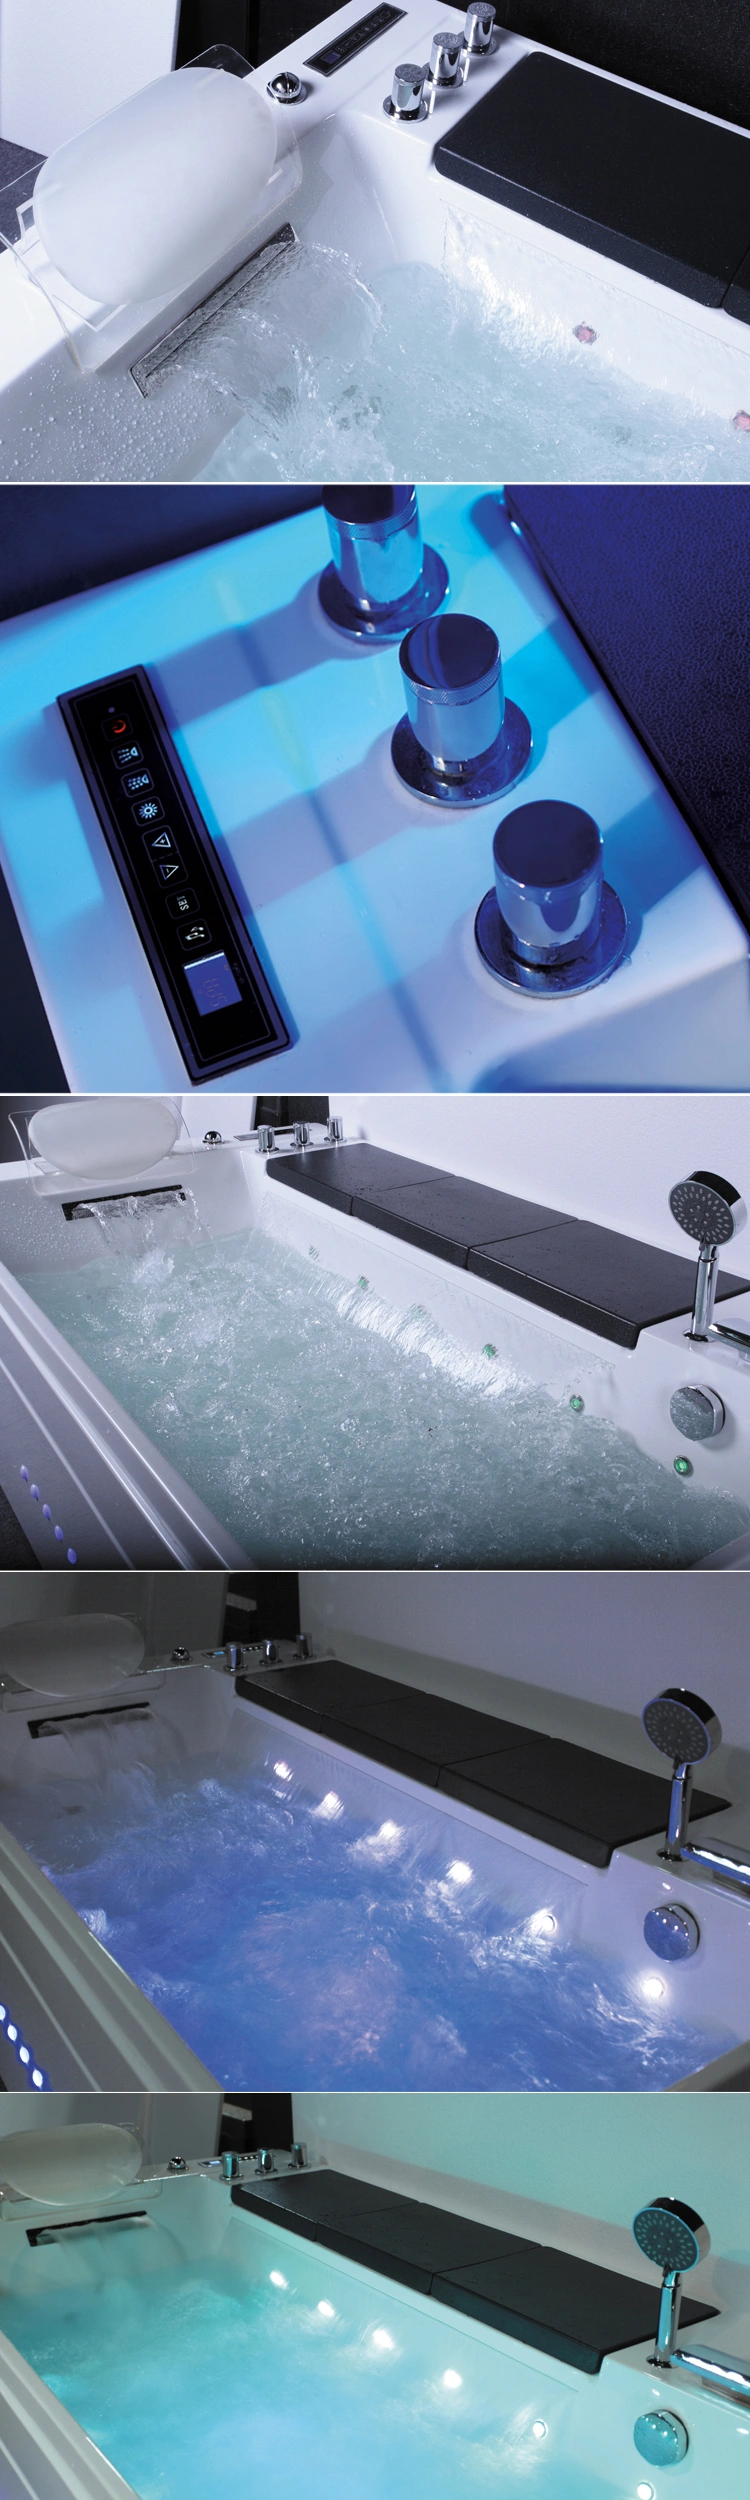 180cm Length for Adult Jakuzi Hydrotherapy Bathtub with Comfortable Pillow